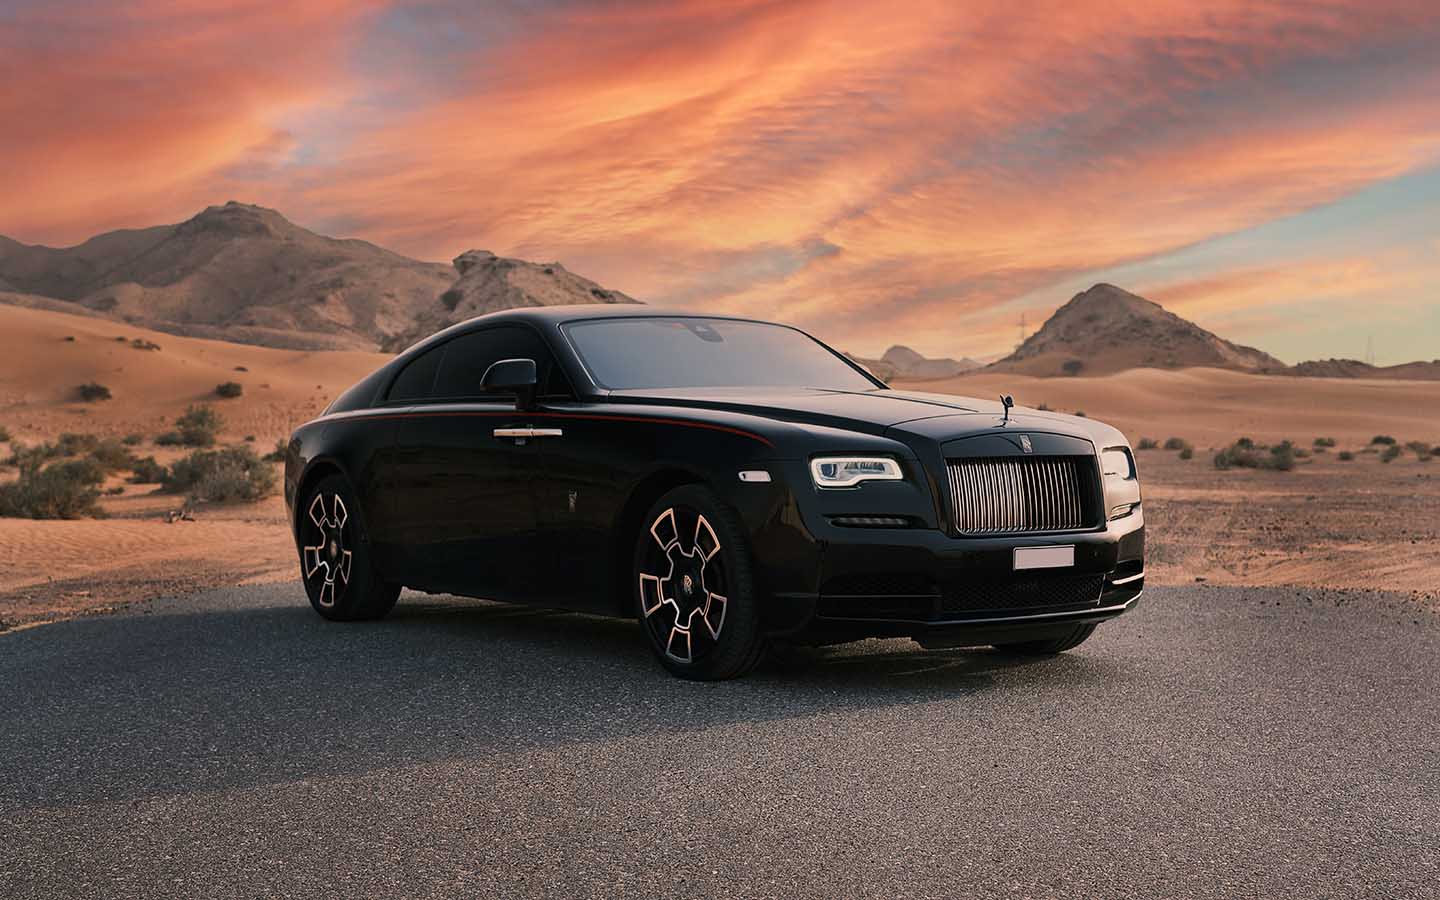 rolls royce ghost houses a v 12 engine